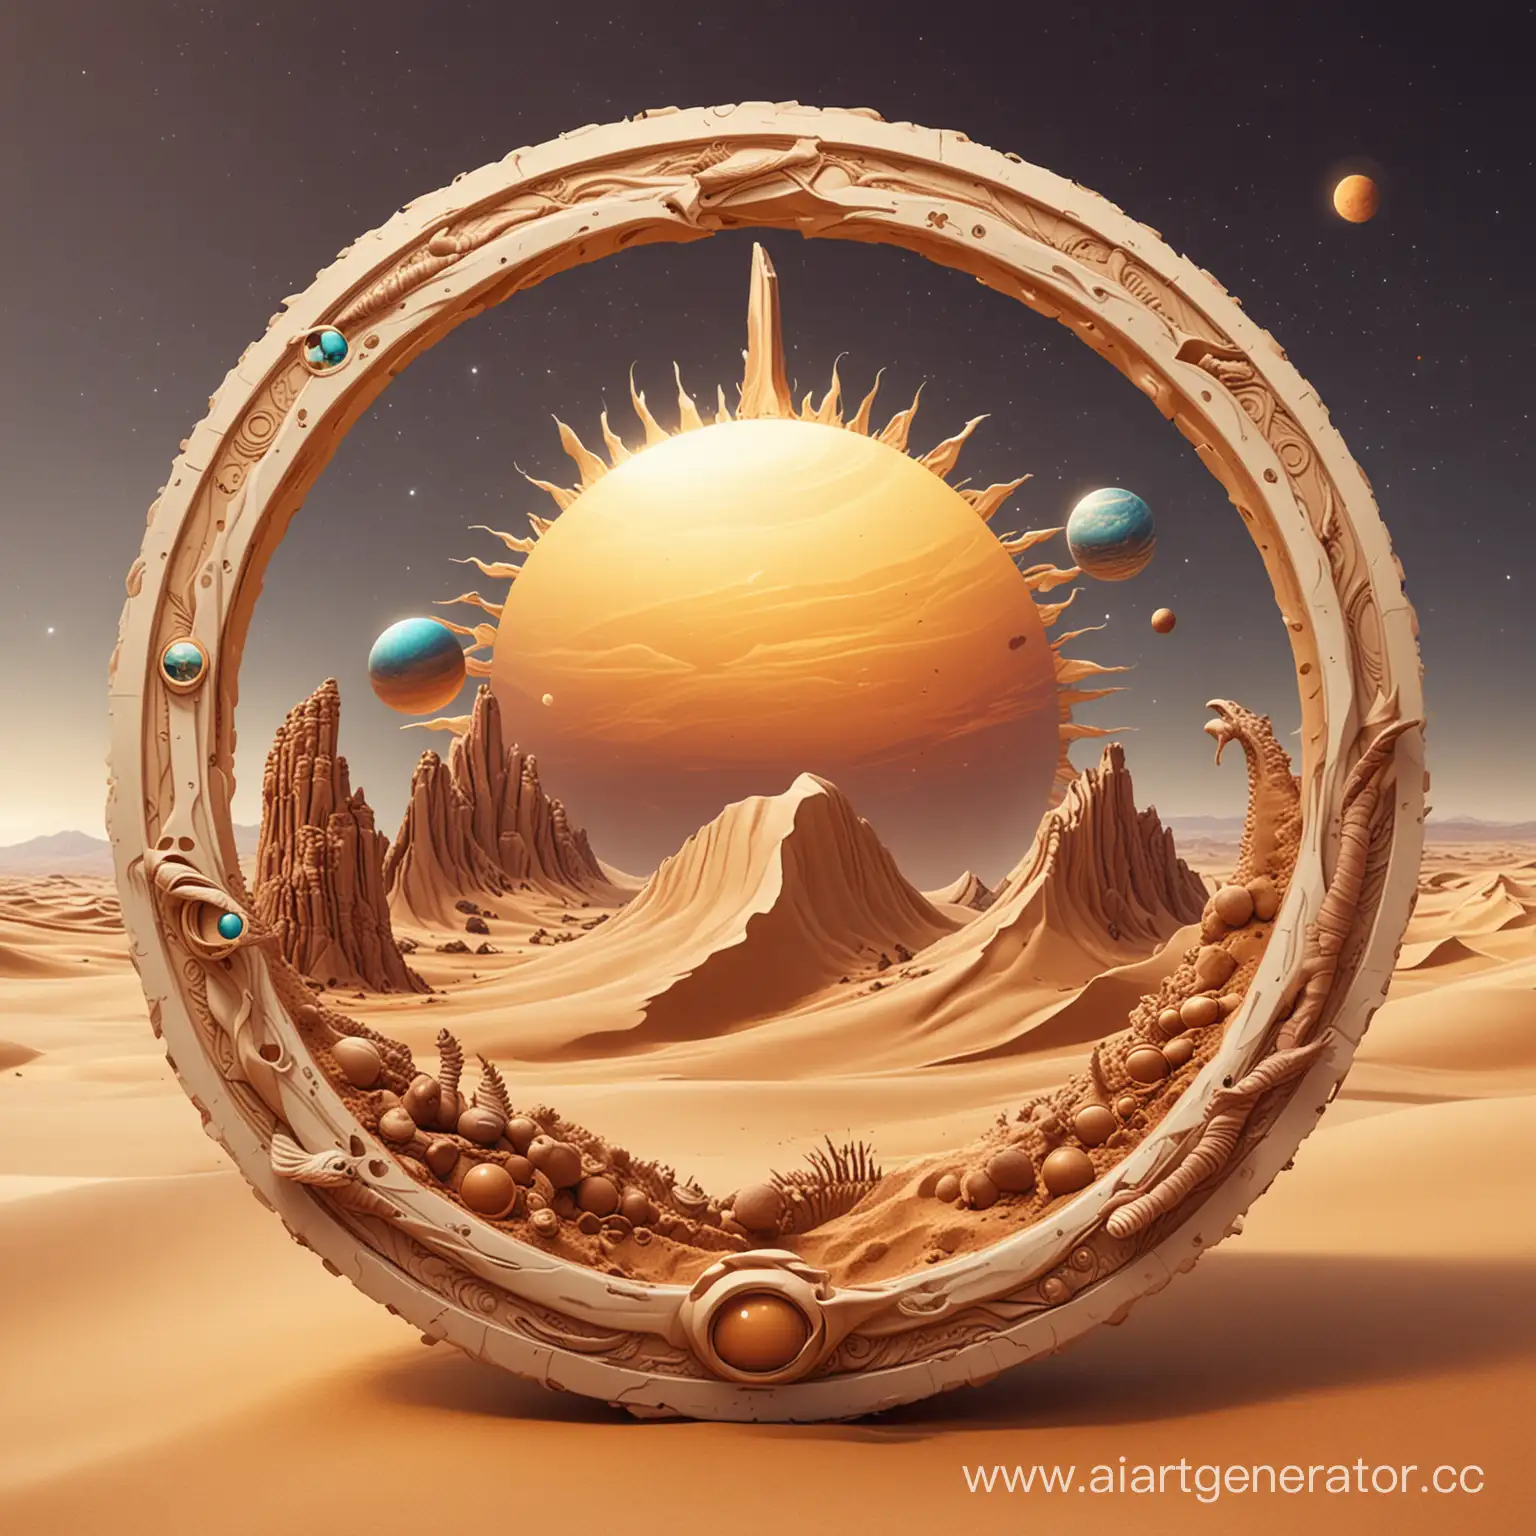 Duneinspired-Sun-Logo-with-Planets-and-Sandworm